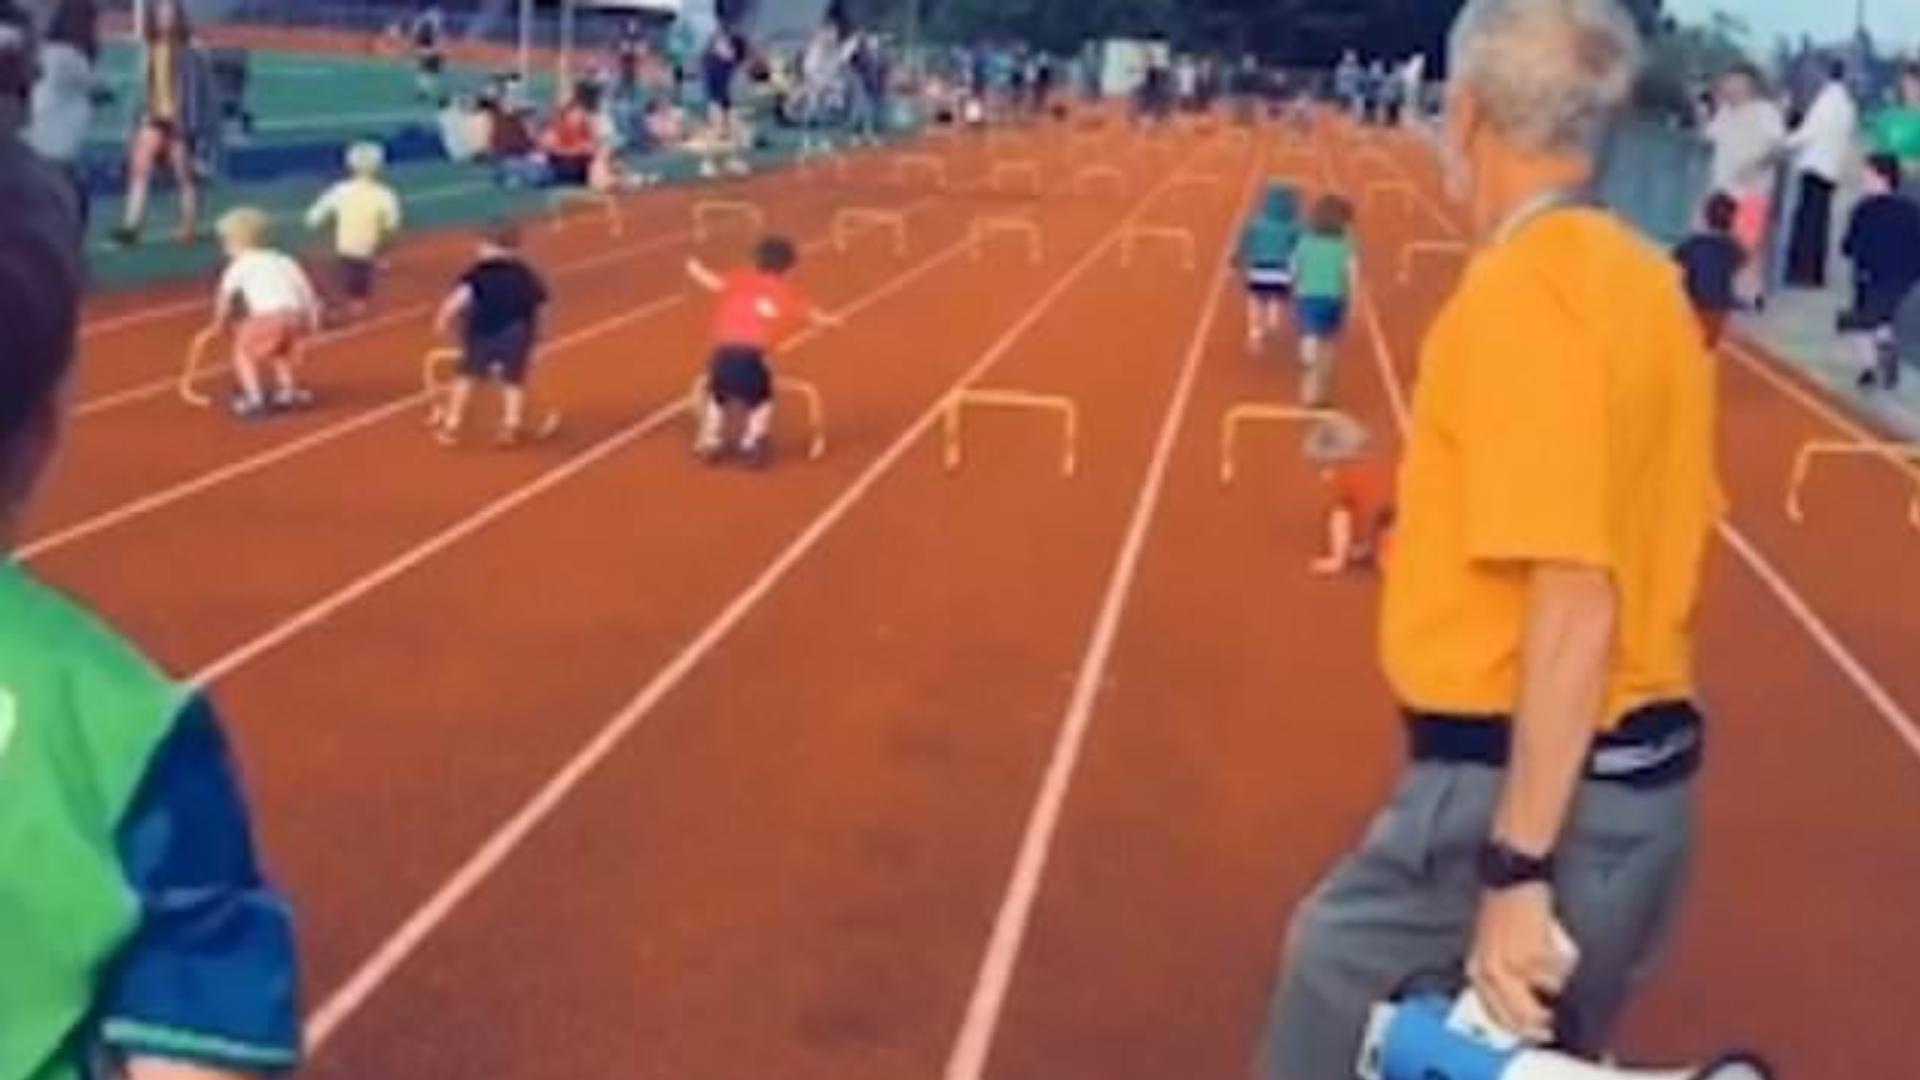 This hurdles event for kids is the best and most chaotic thing you'll watch today